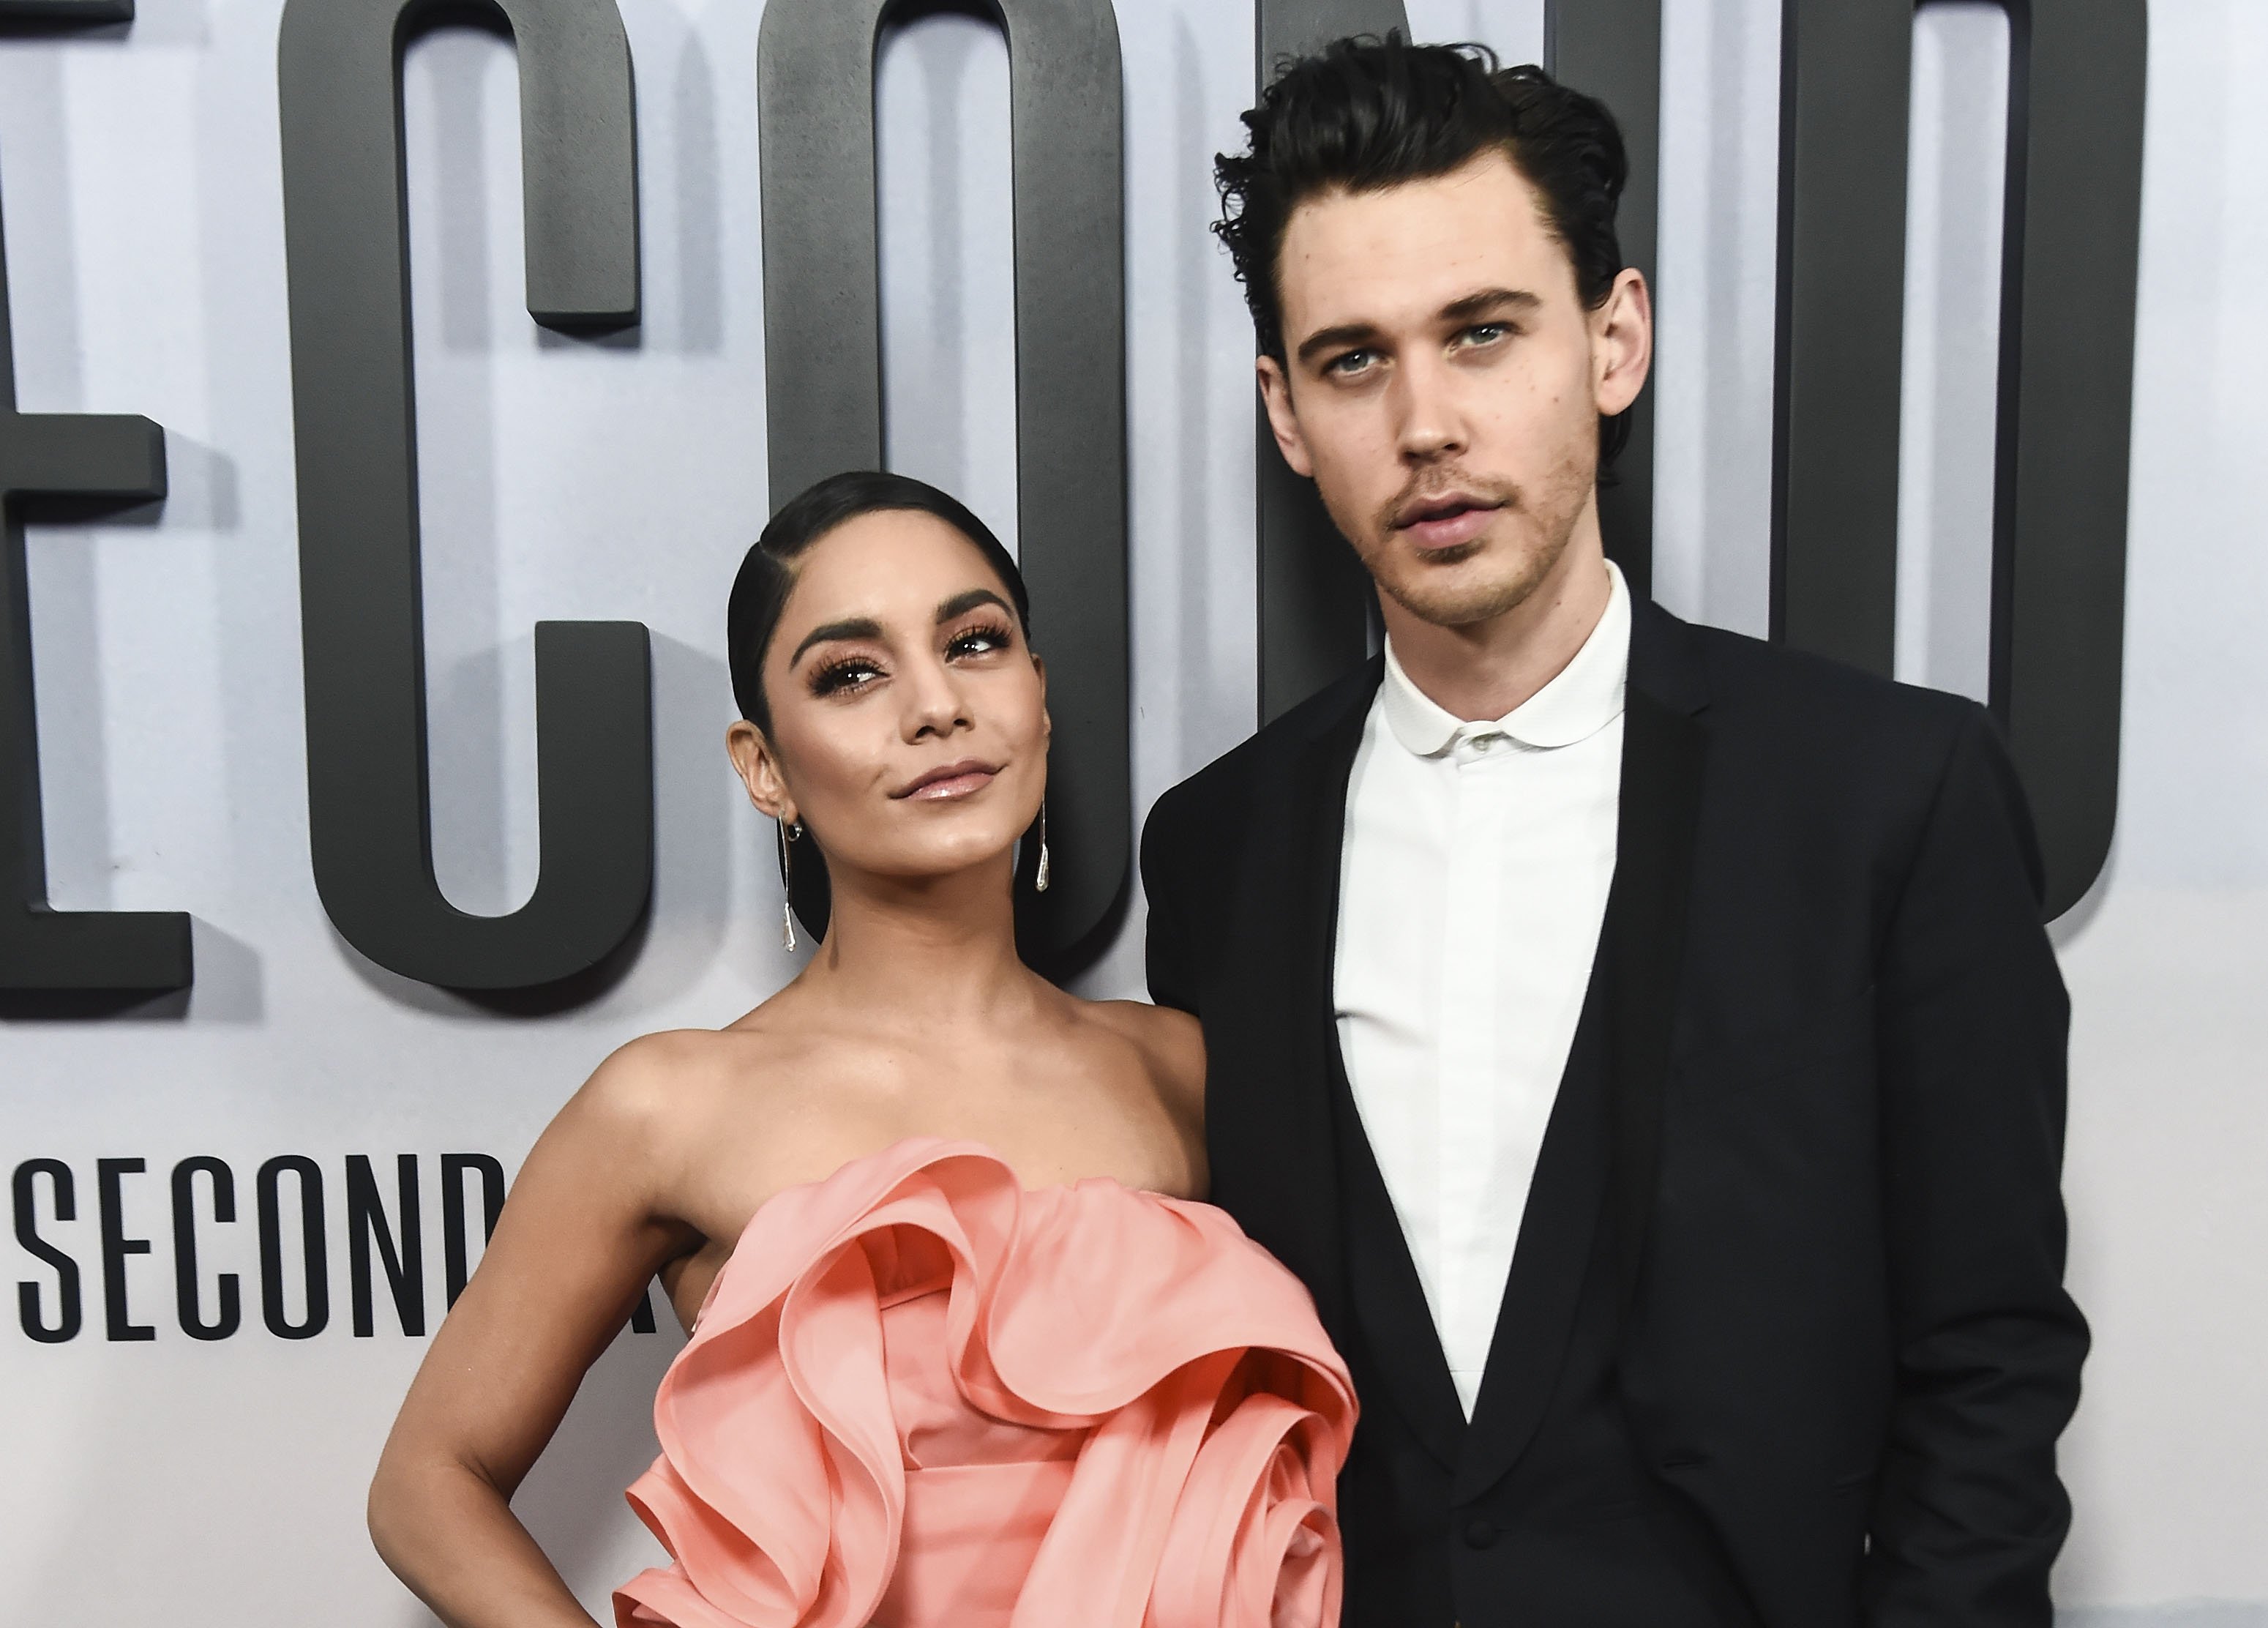 Vanessa Hudgens and Austin Butler at the 'Second Act' World Premiere on December 12, 2018 in New York. | Source: Getty Images